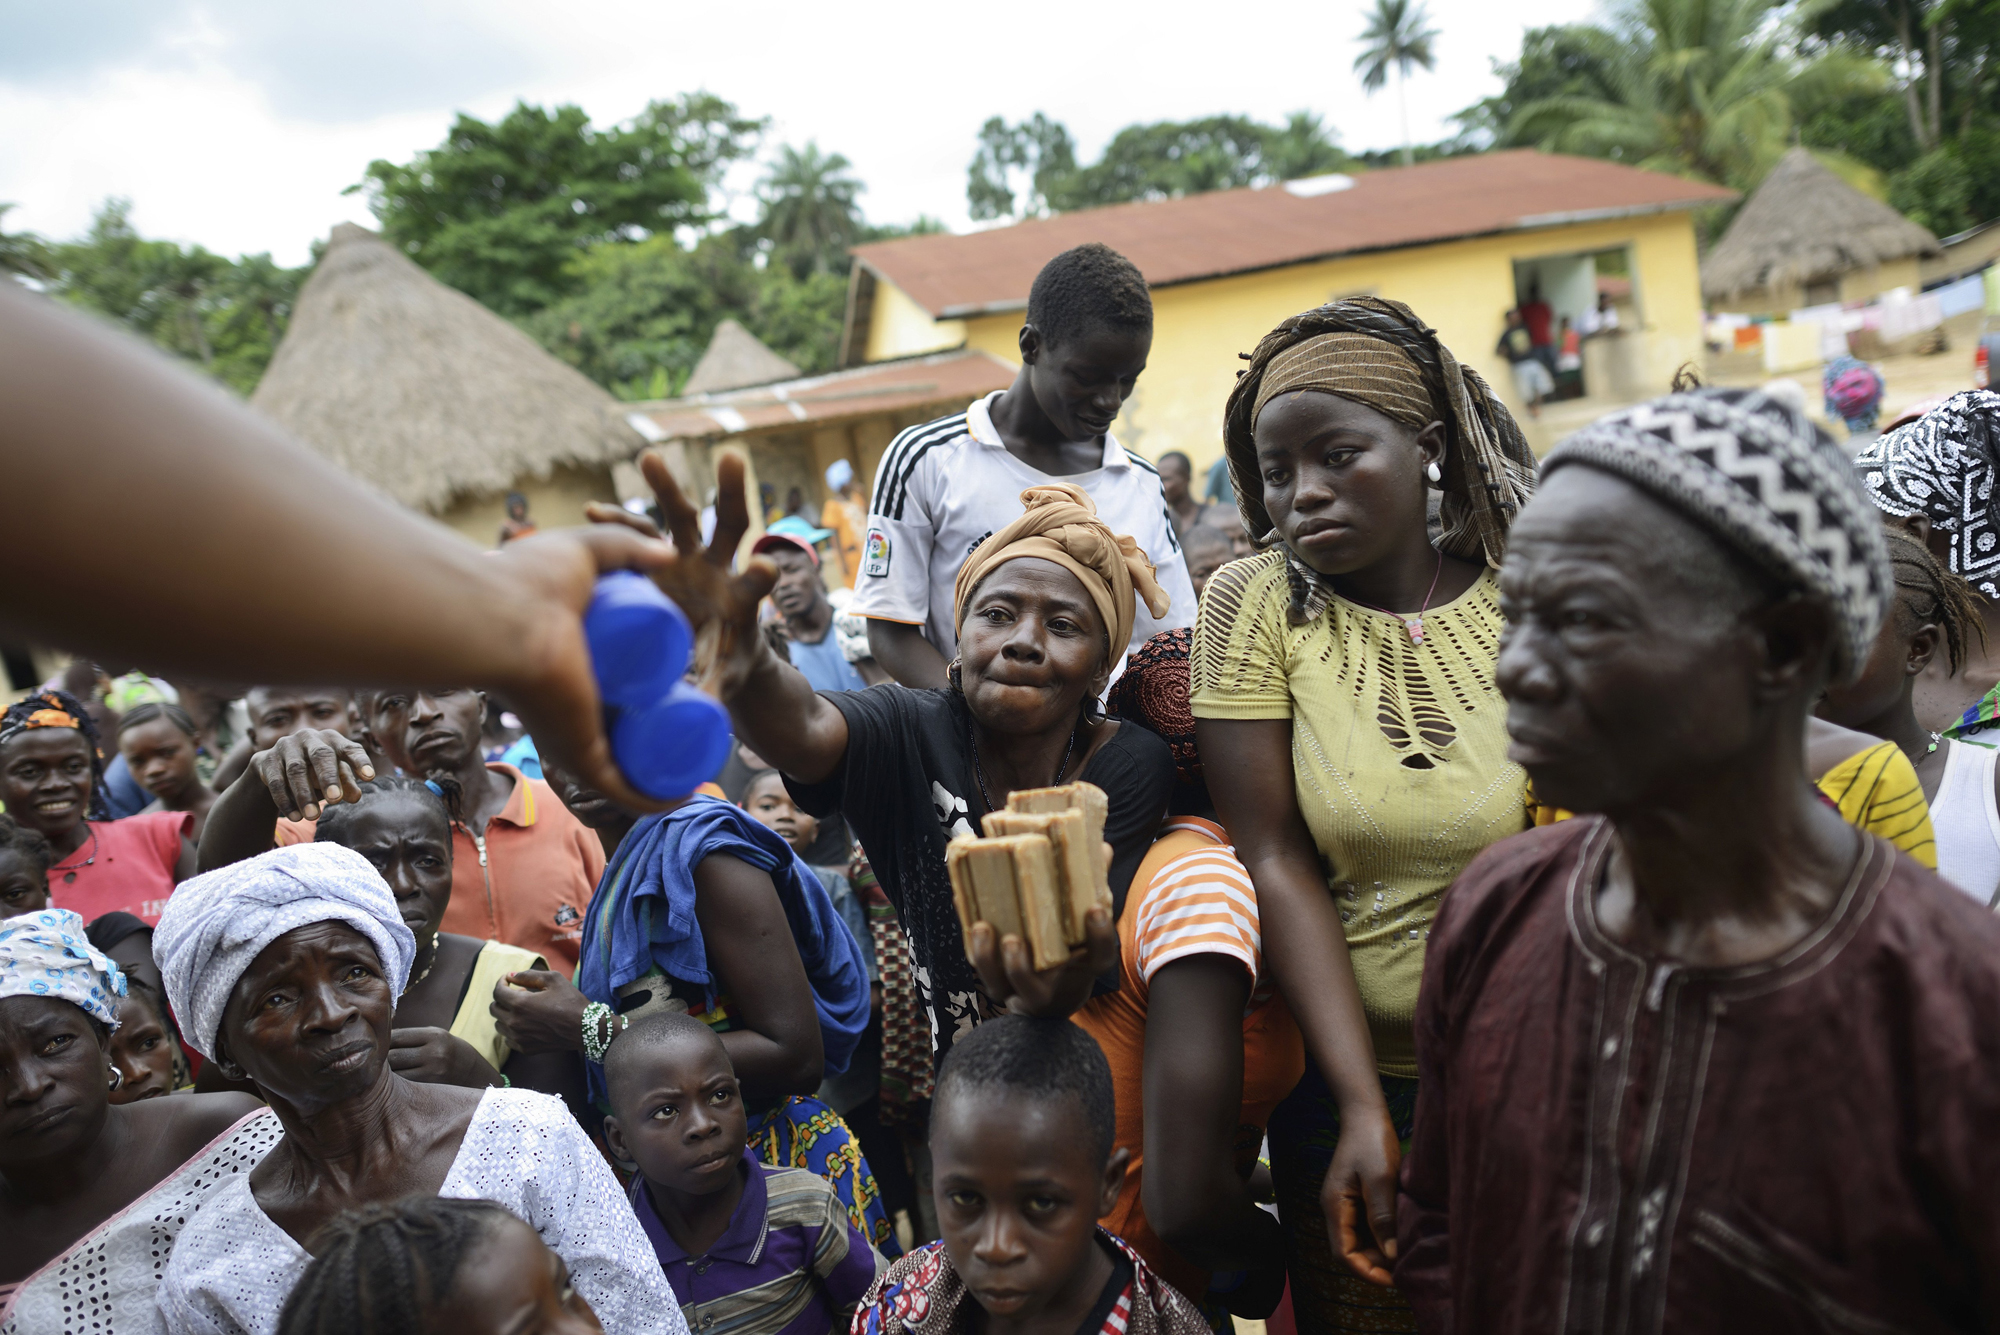 Members of the World Health Organization and Red Cross hand out chlorine and medical soap to combat the spread of the Ebola virus in Bawa, Guinea.